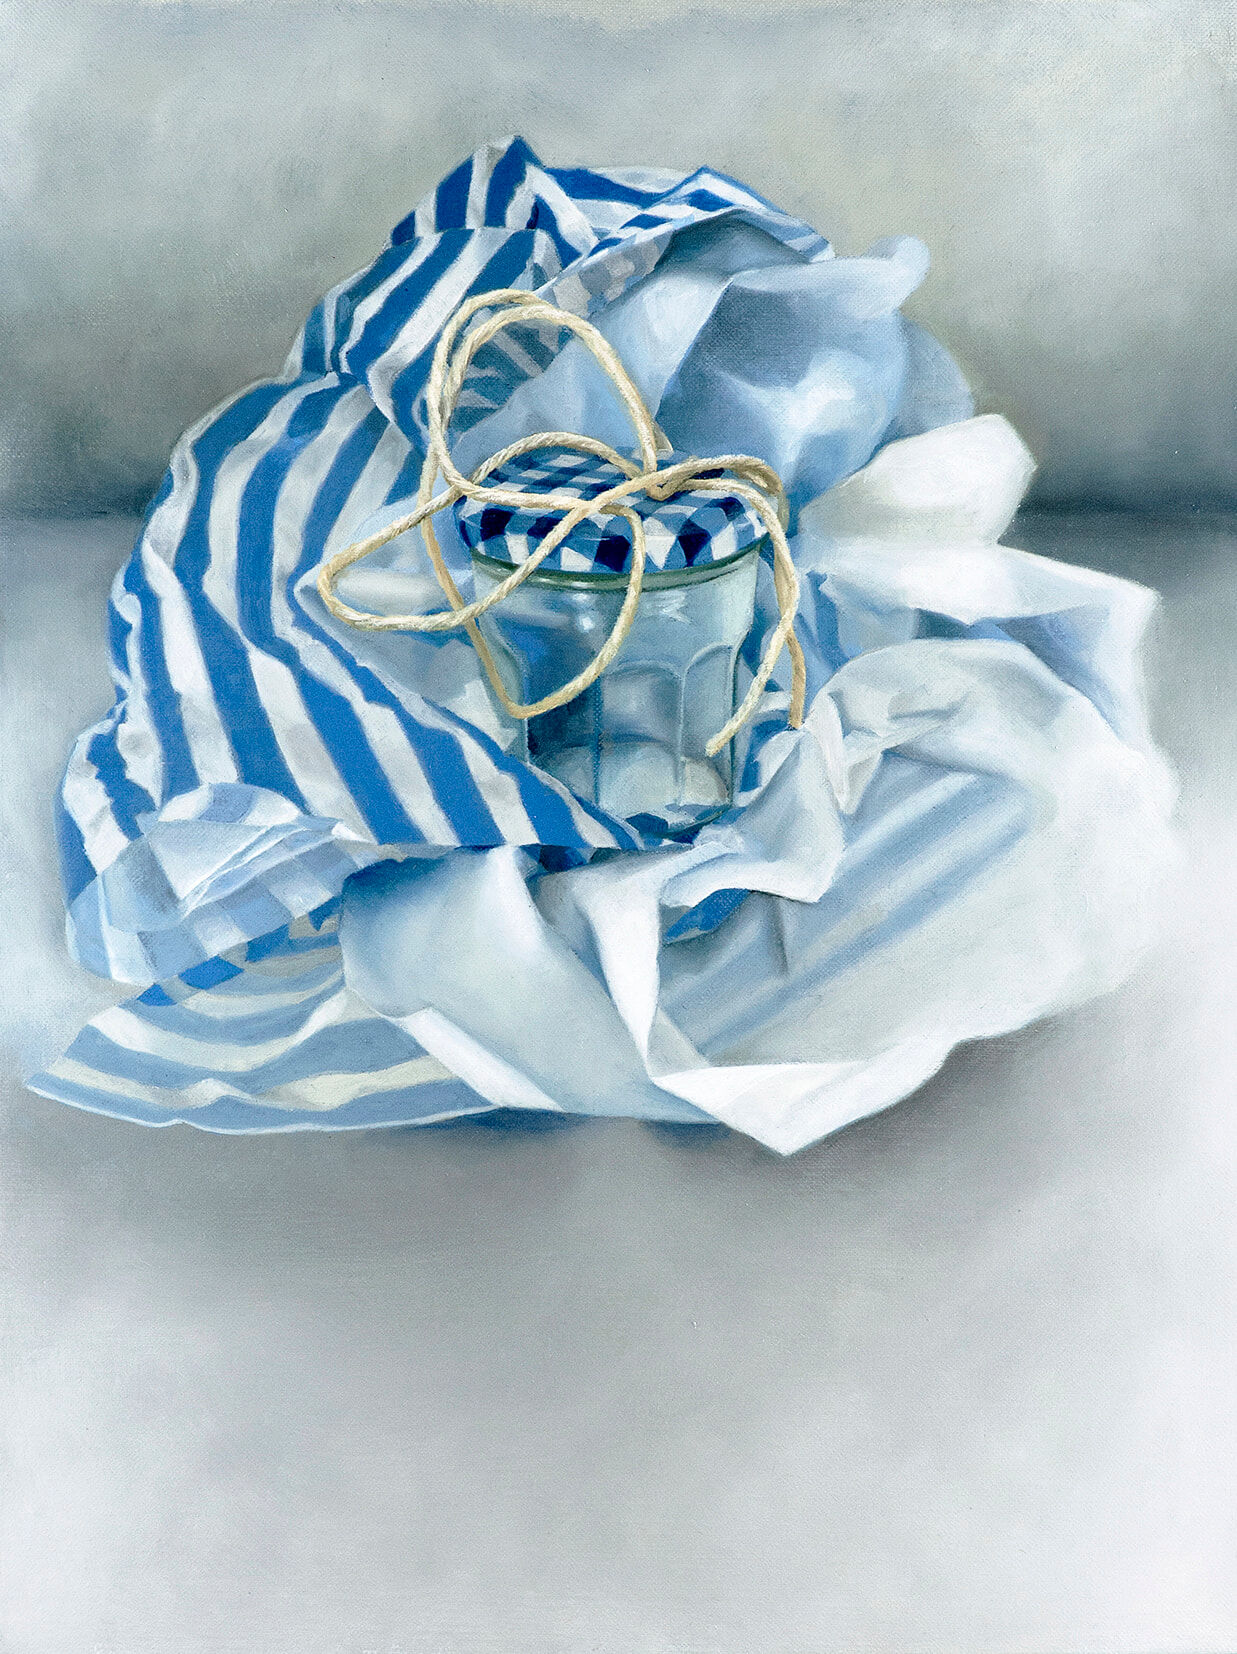 _Consumed Still Life oil painting by Cally lotz. Empty Jam jar unwrapped in blue striped wrapping paper and string.striped wra